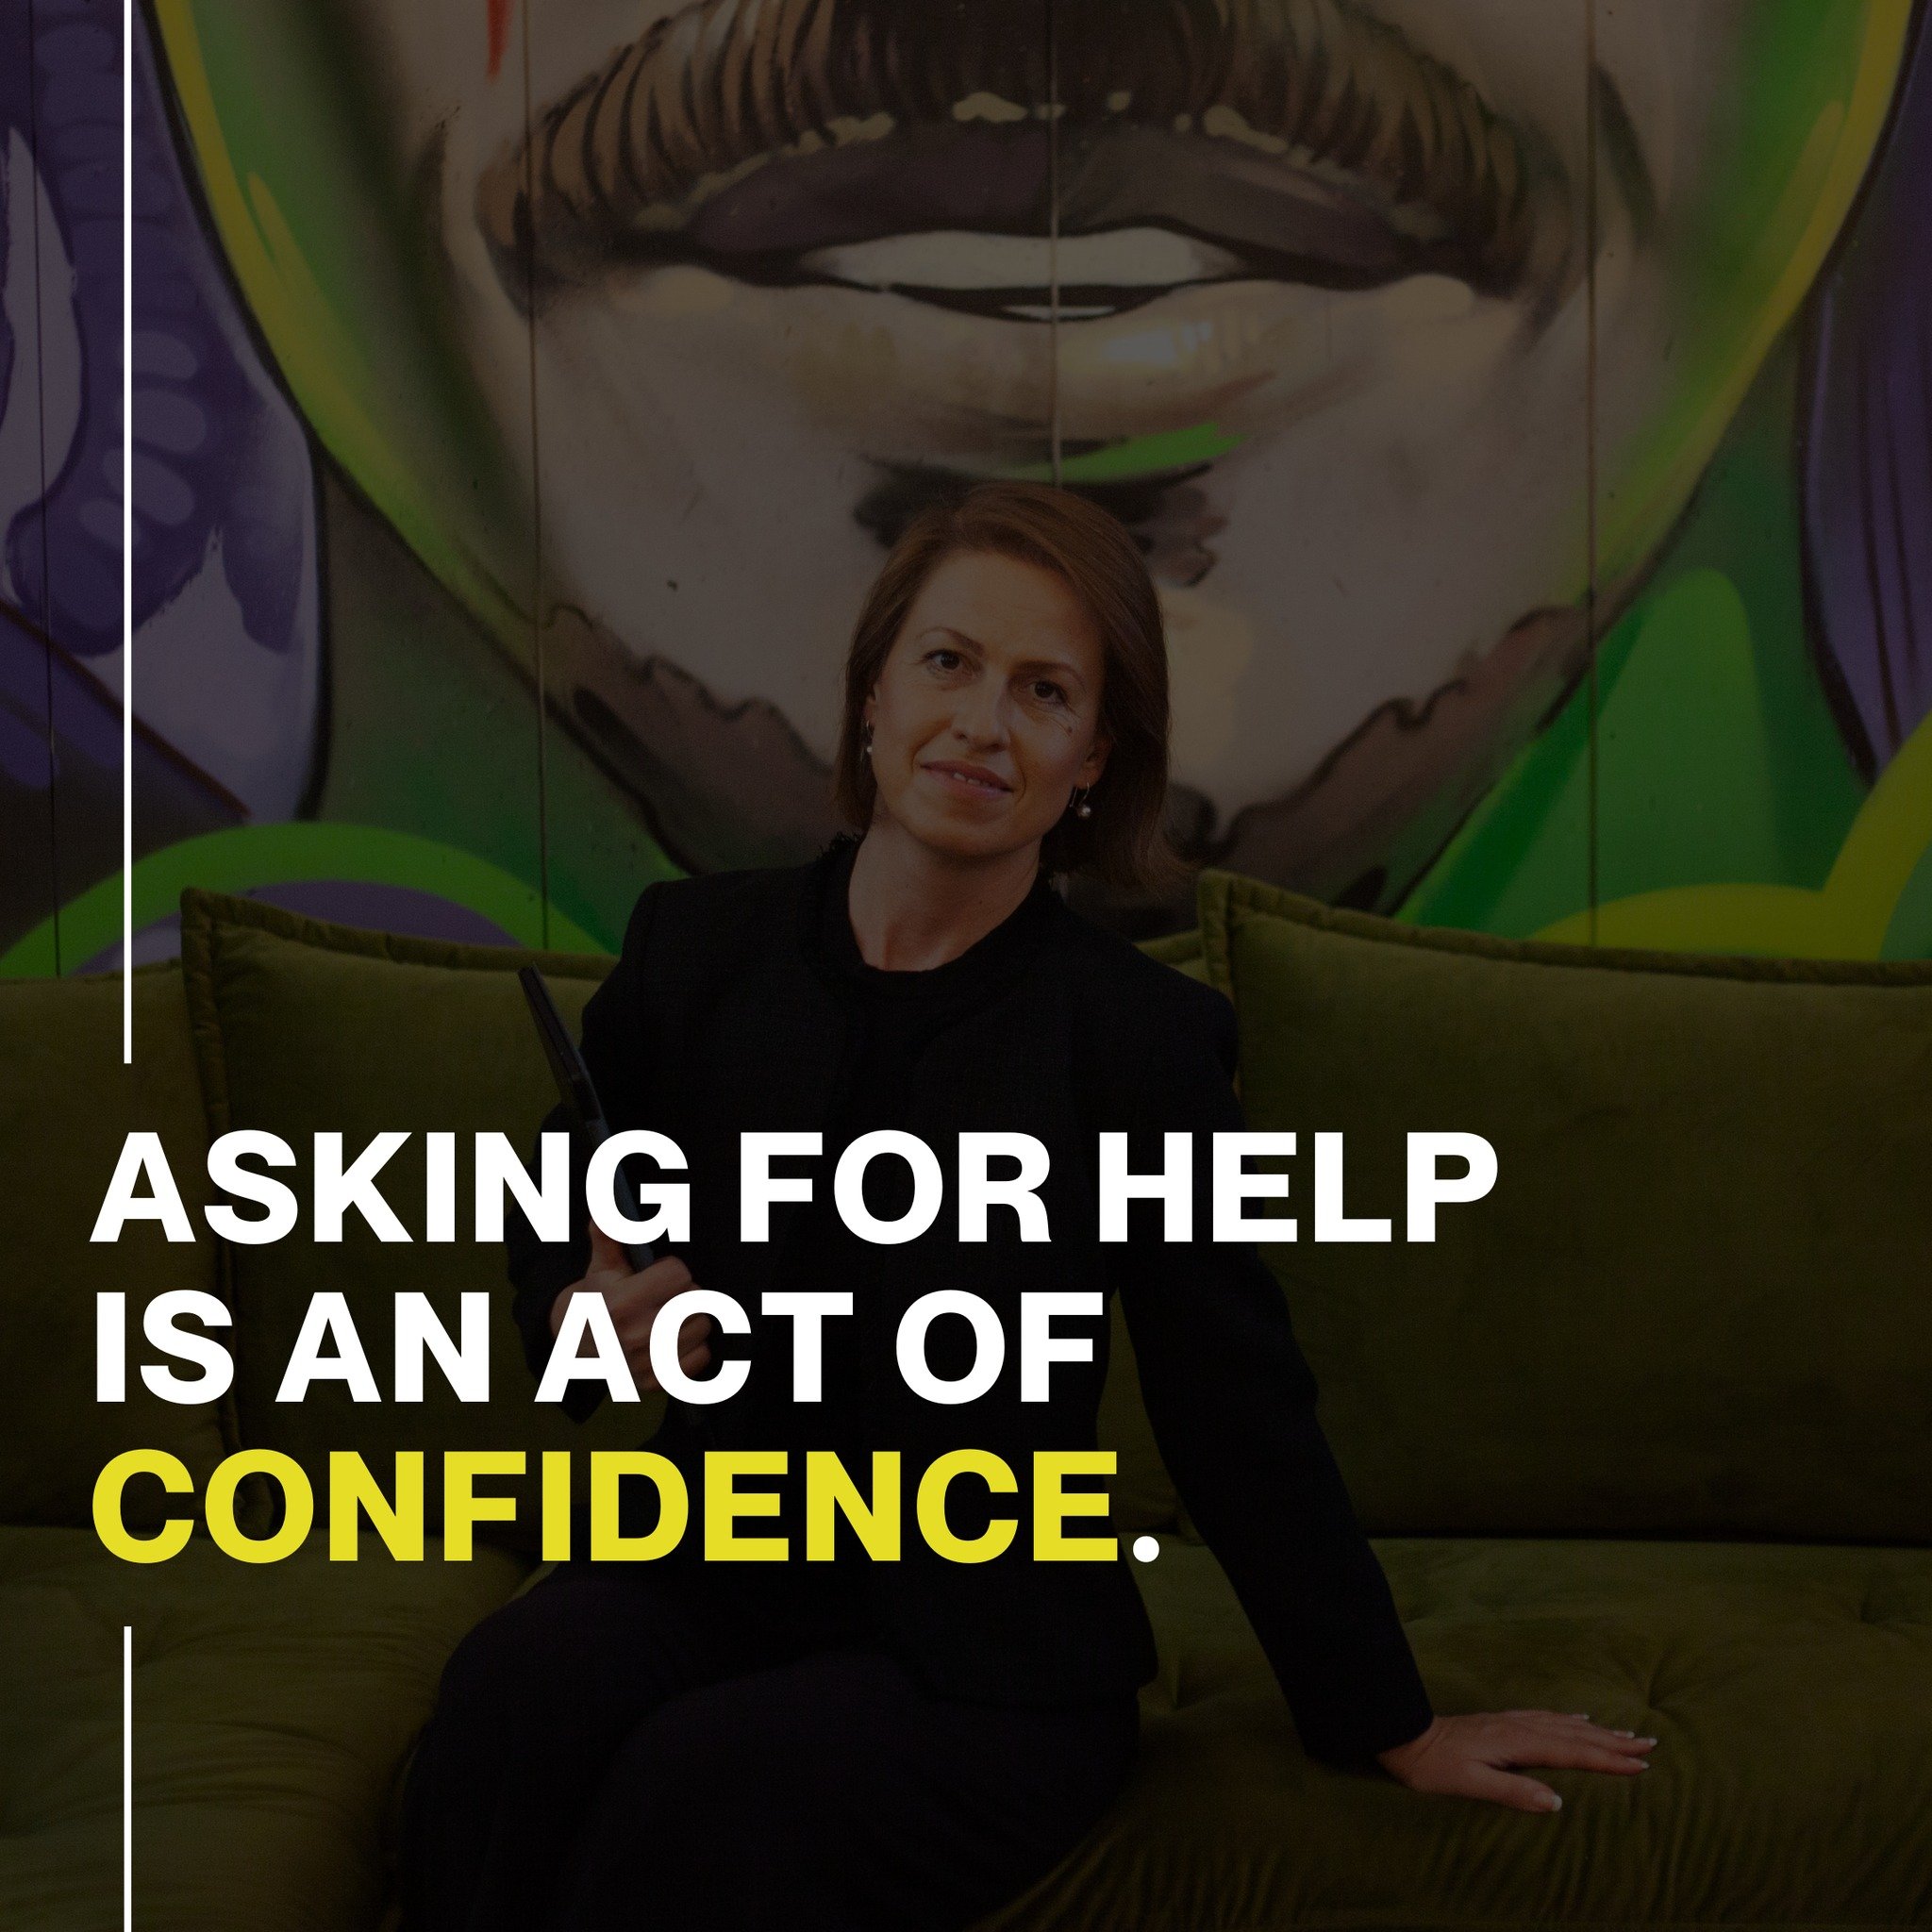 In a world that often glorifies independence and self-reliance, it can be easy to overlook the power of vulnerability. Yet, by reaching out and acknowledging our need for support, we demonstrate a profound level of confidence in ourselves and our abi